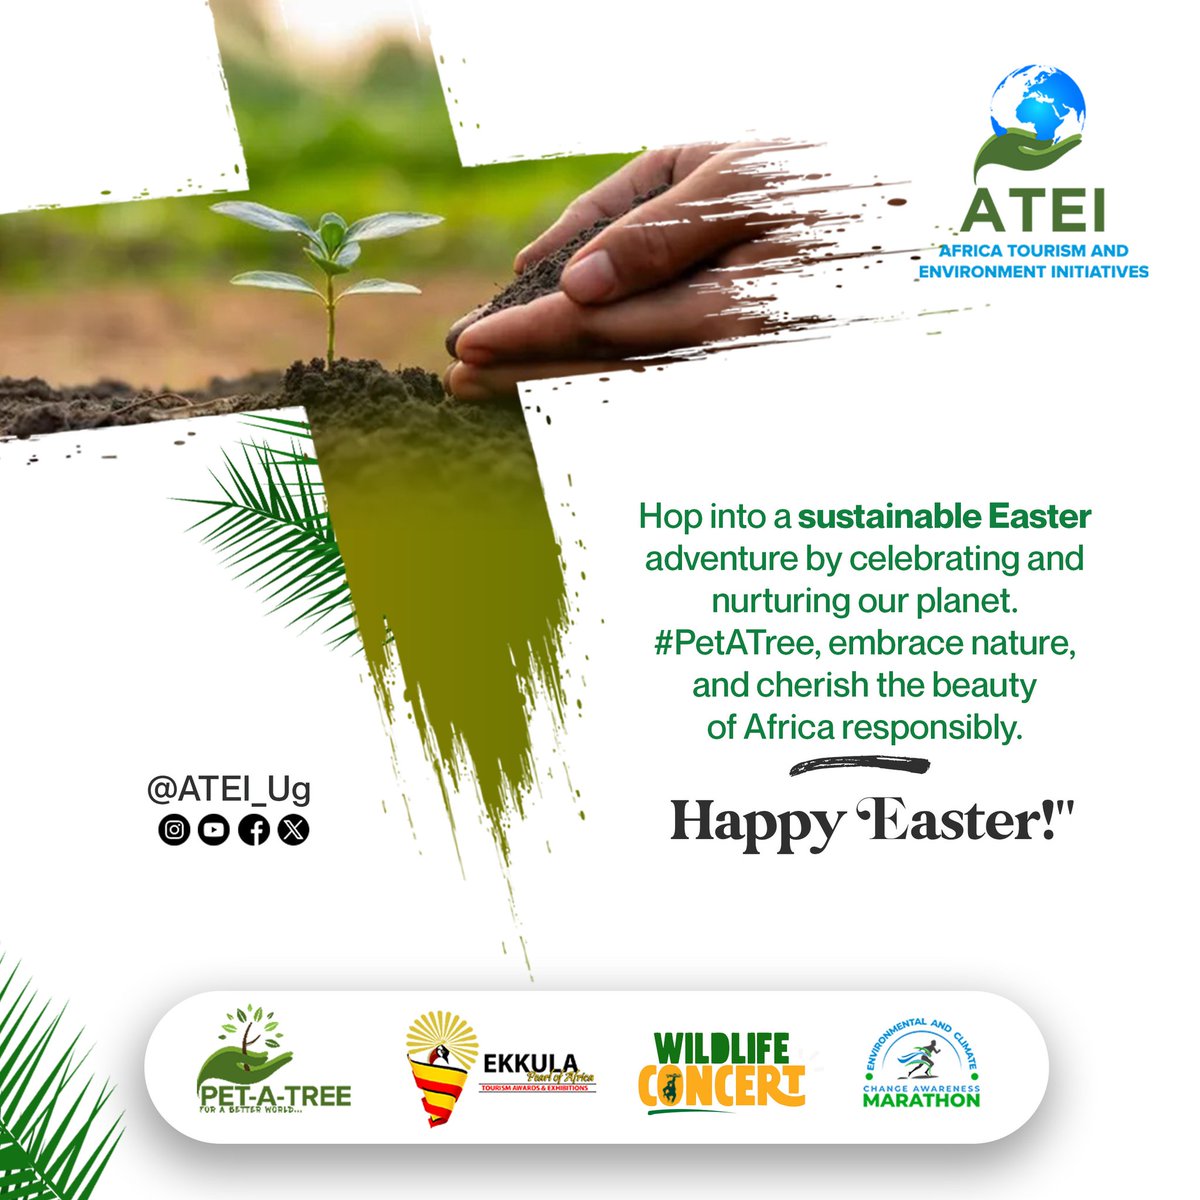 Wishing you a joyful Easter from the team at @ATEIUg! As we celebrate, let's consider planting a tree to contribute to a greener environment and sustainable future. Together, let's nurture our planet for generations to come. #PetATree #ClimateAction #SustainableLiving